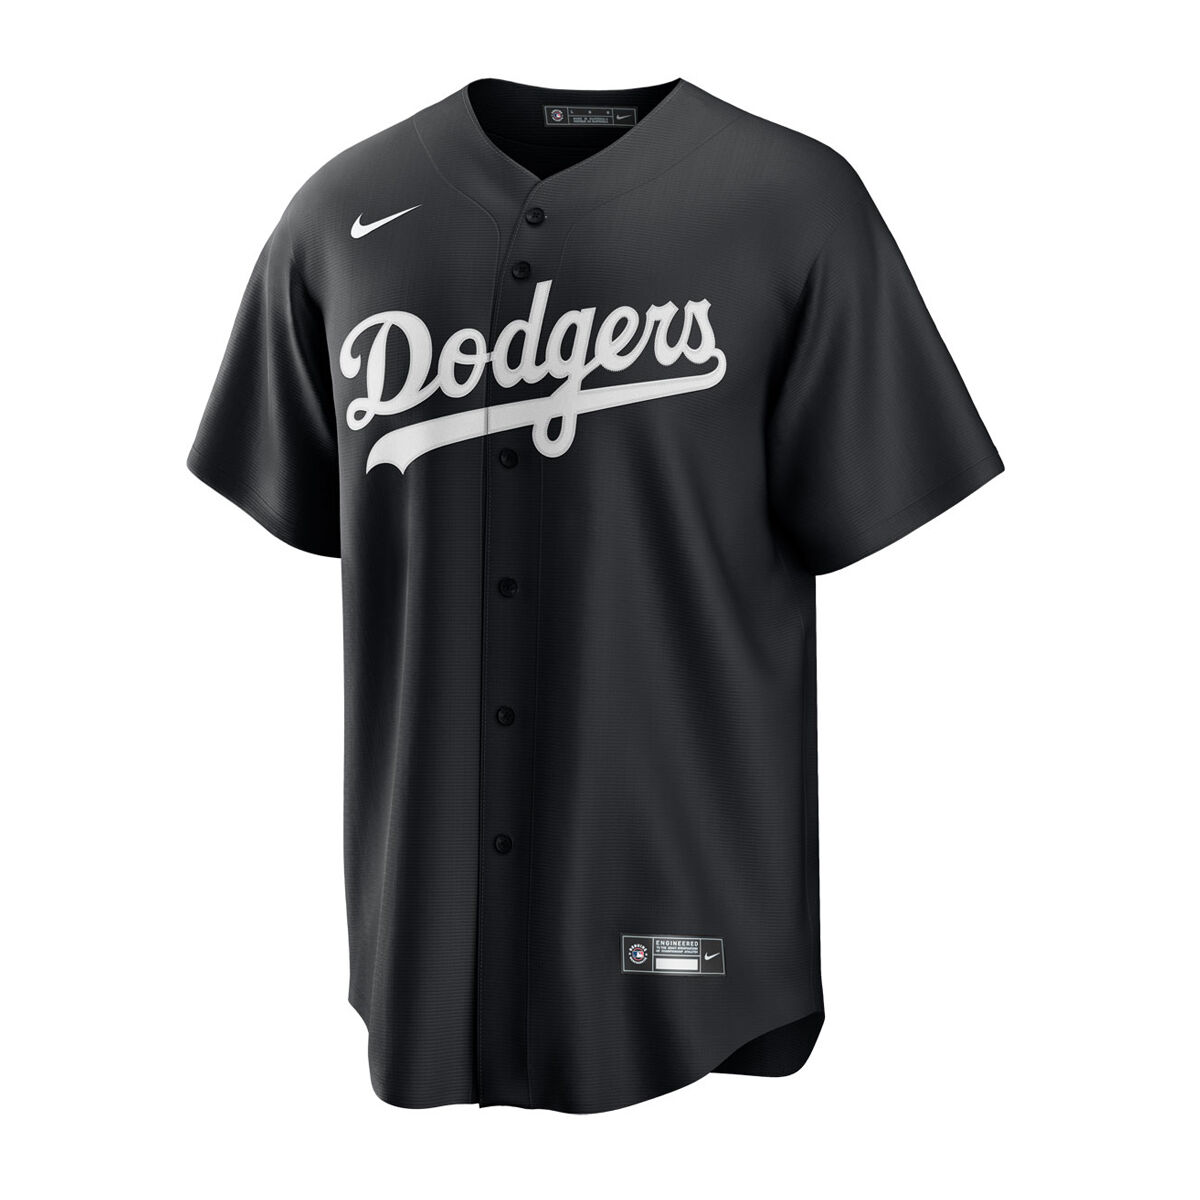 Los Angeles Dodgers Nike Official Replica Alternate Jersey - Womens